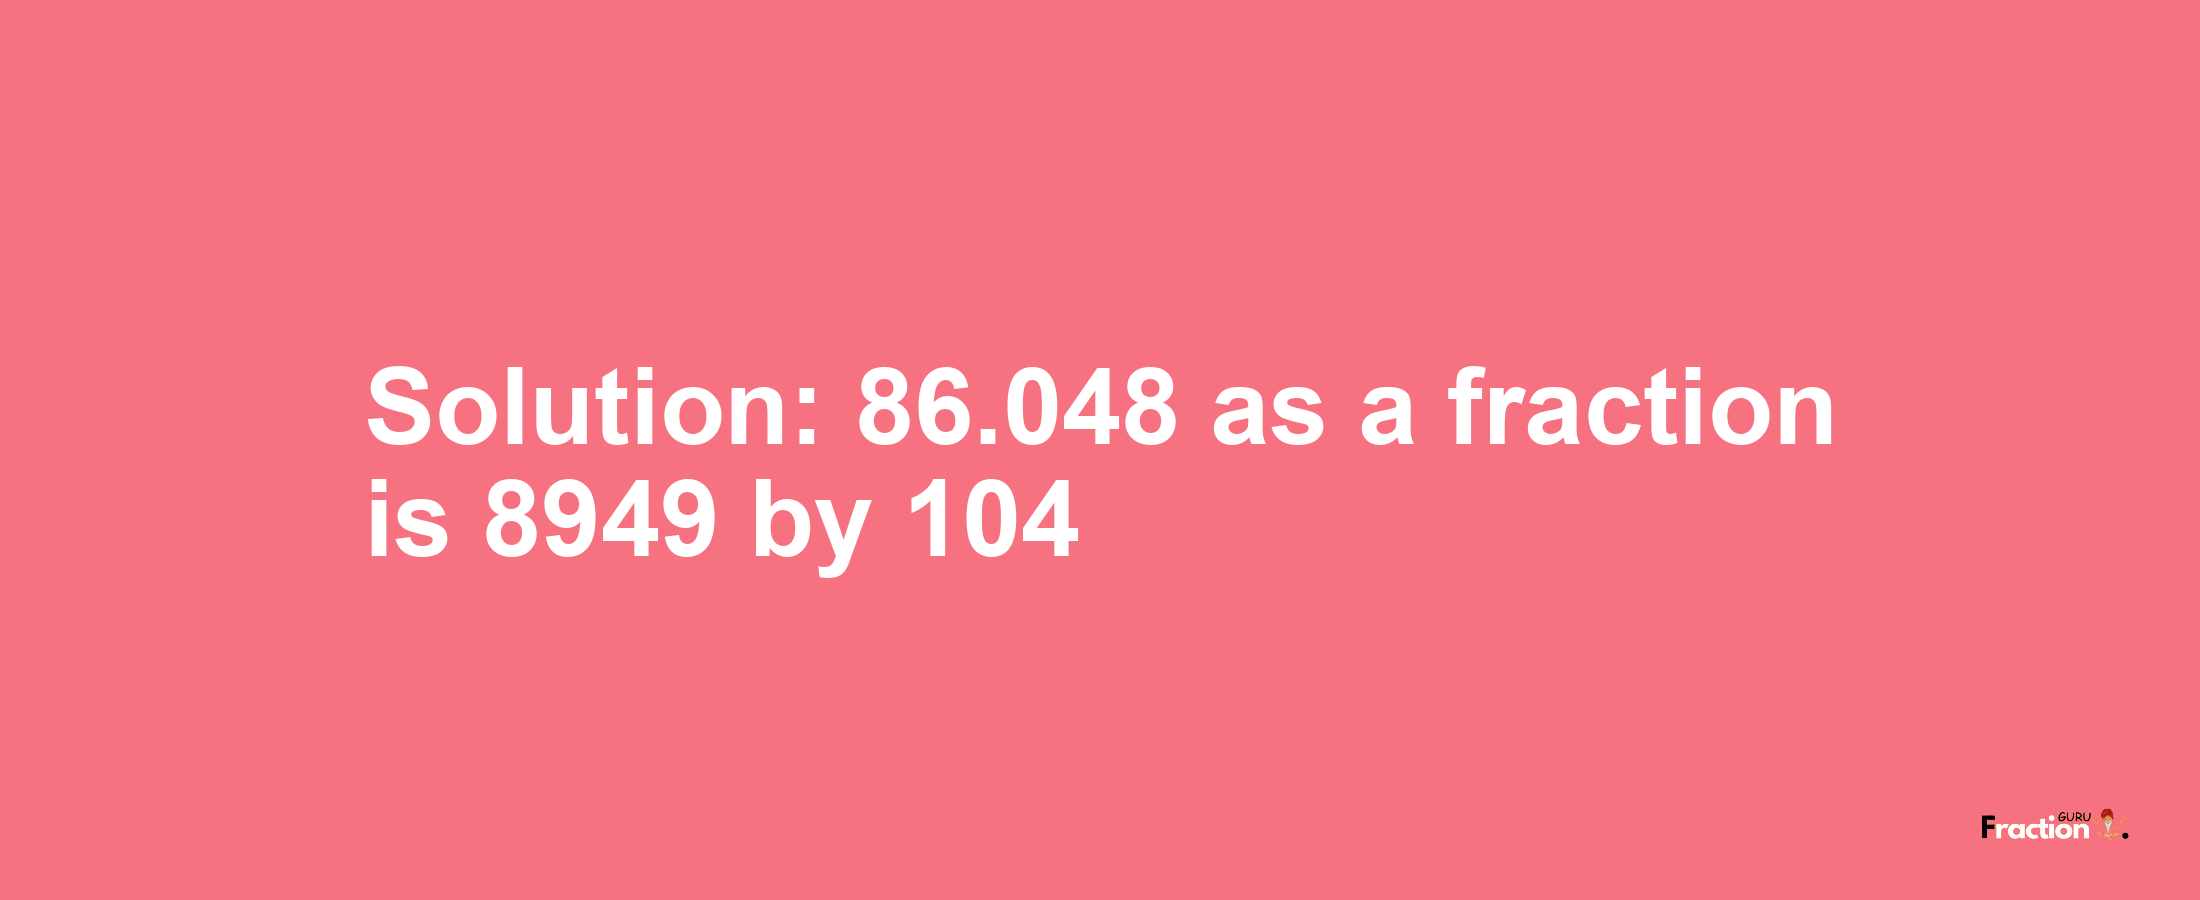 Solution:86.048 as a fraction is 8949/104